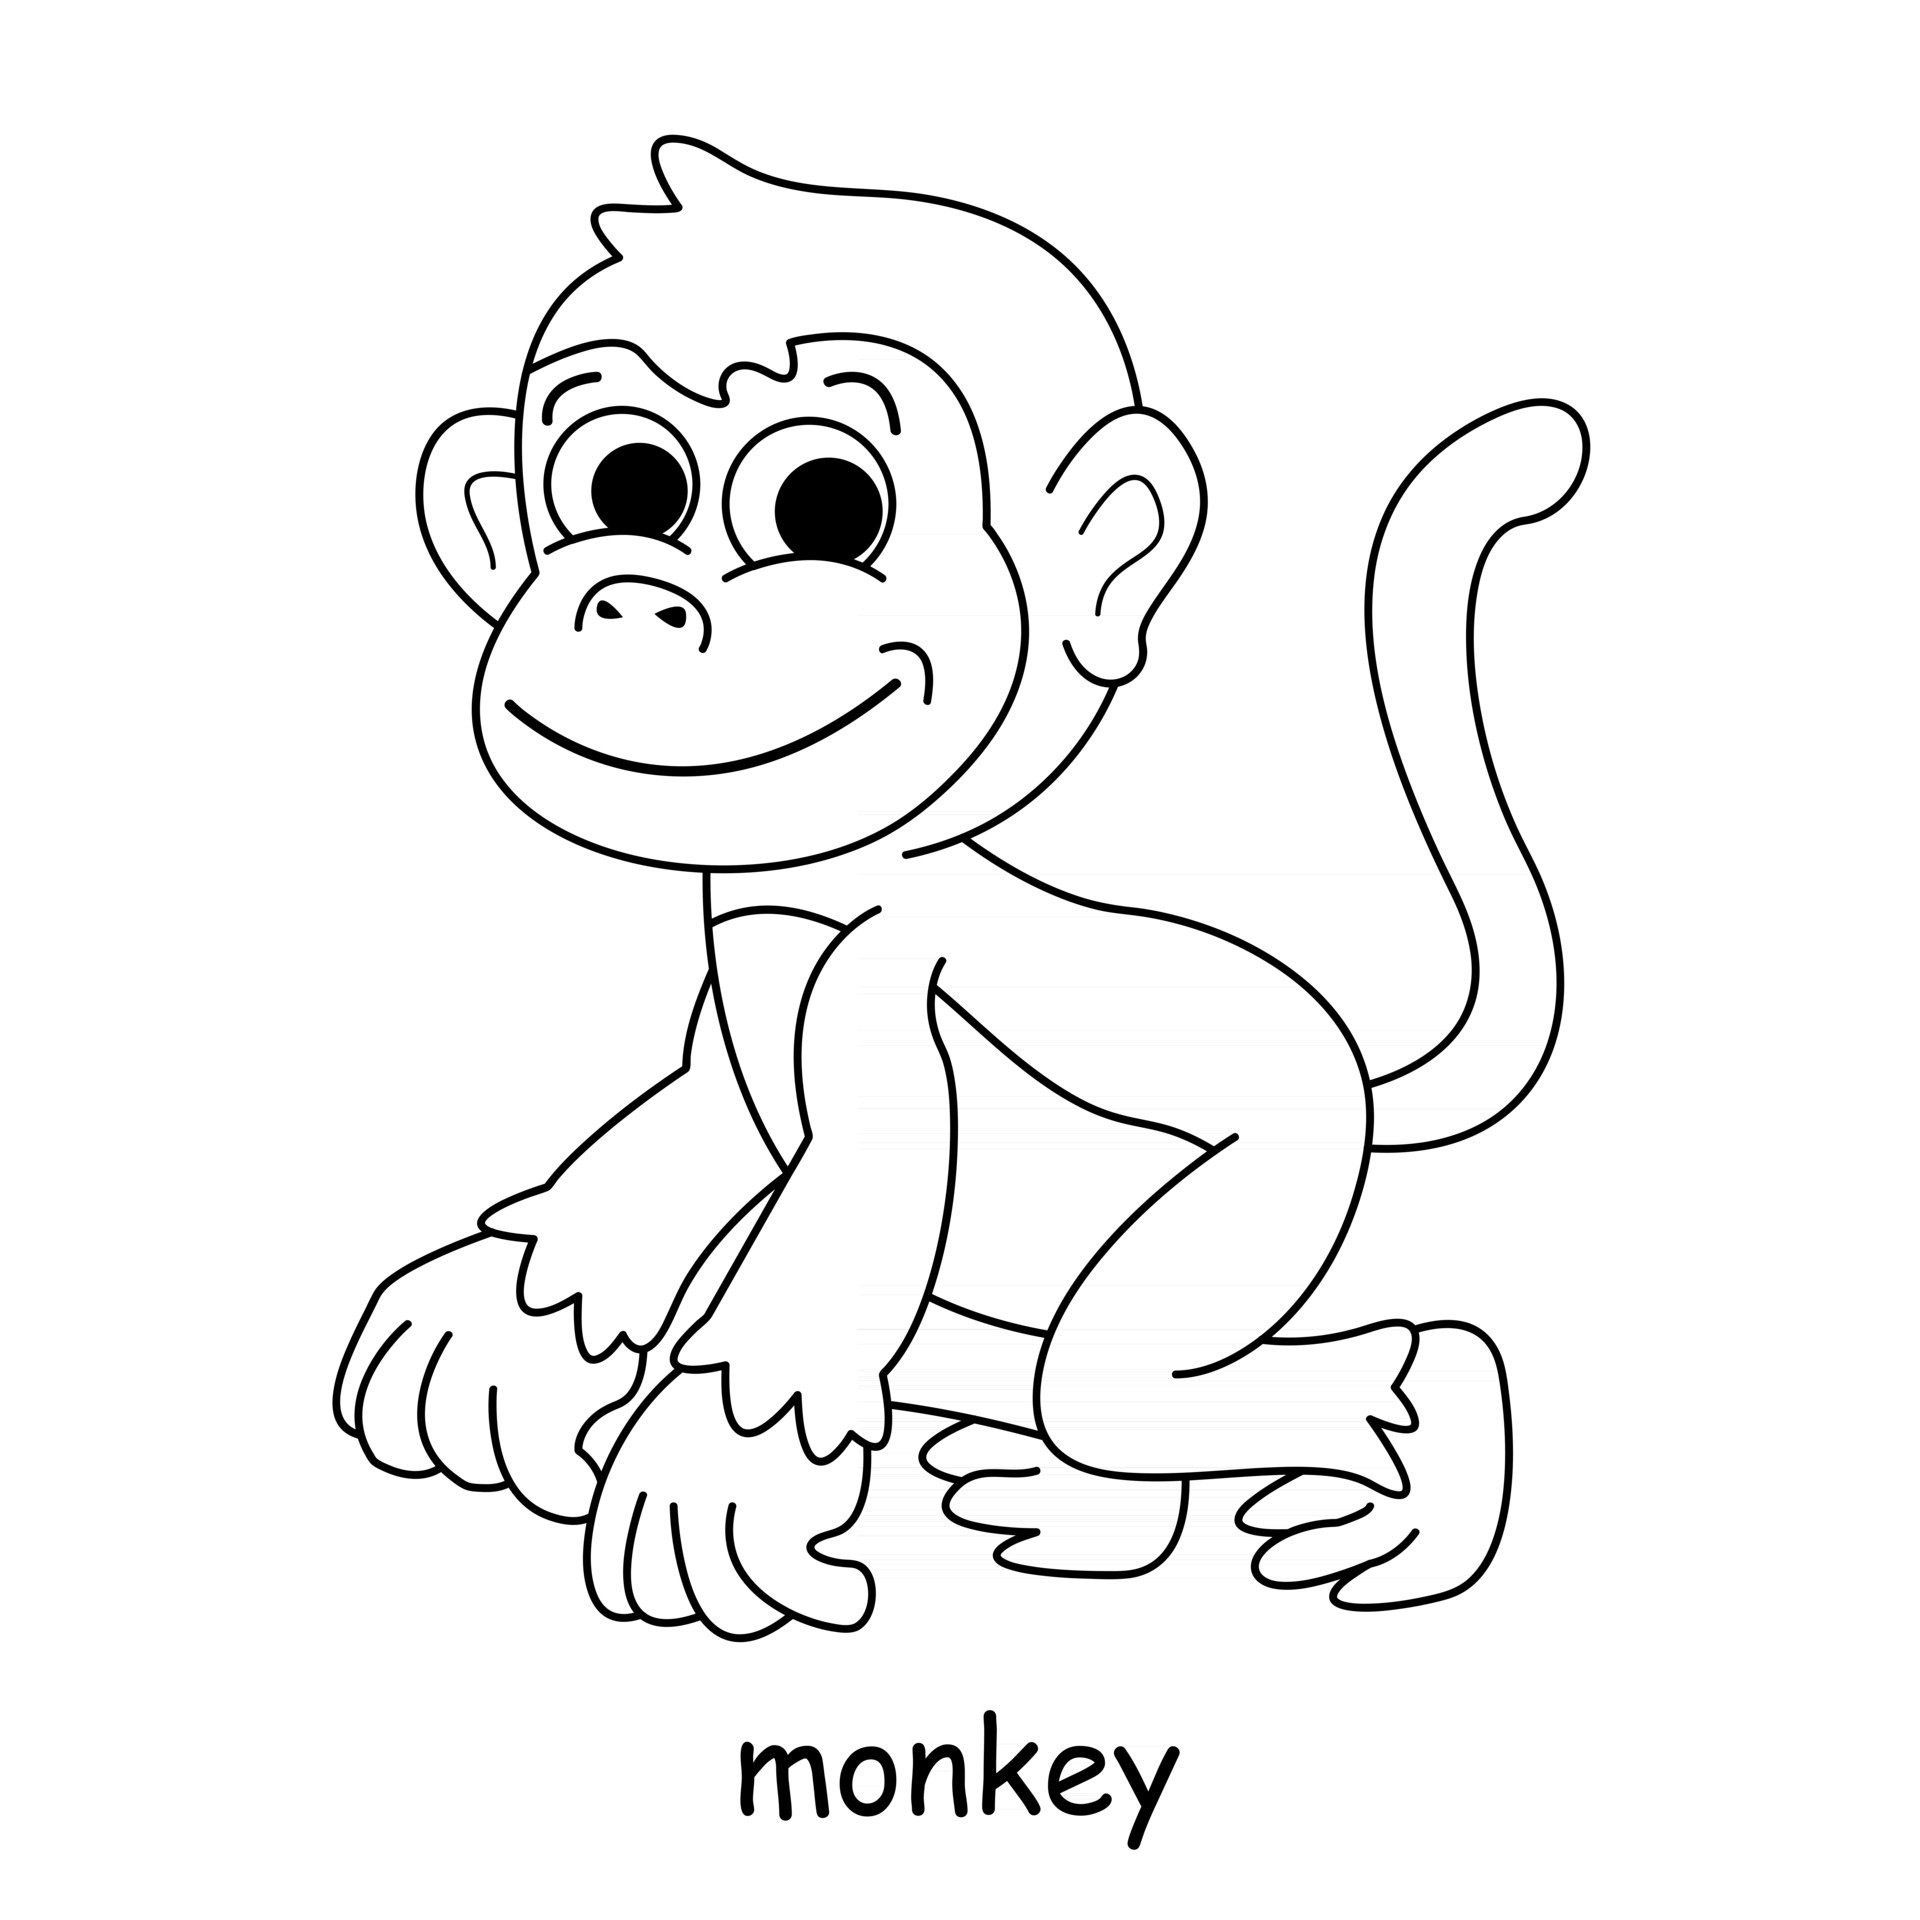 cute monkey drawing & coloring page for kids || how to draw cute monkey -  YouTube